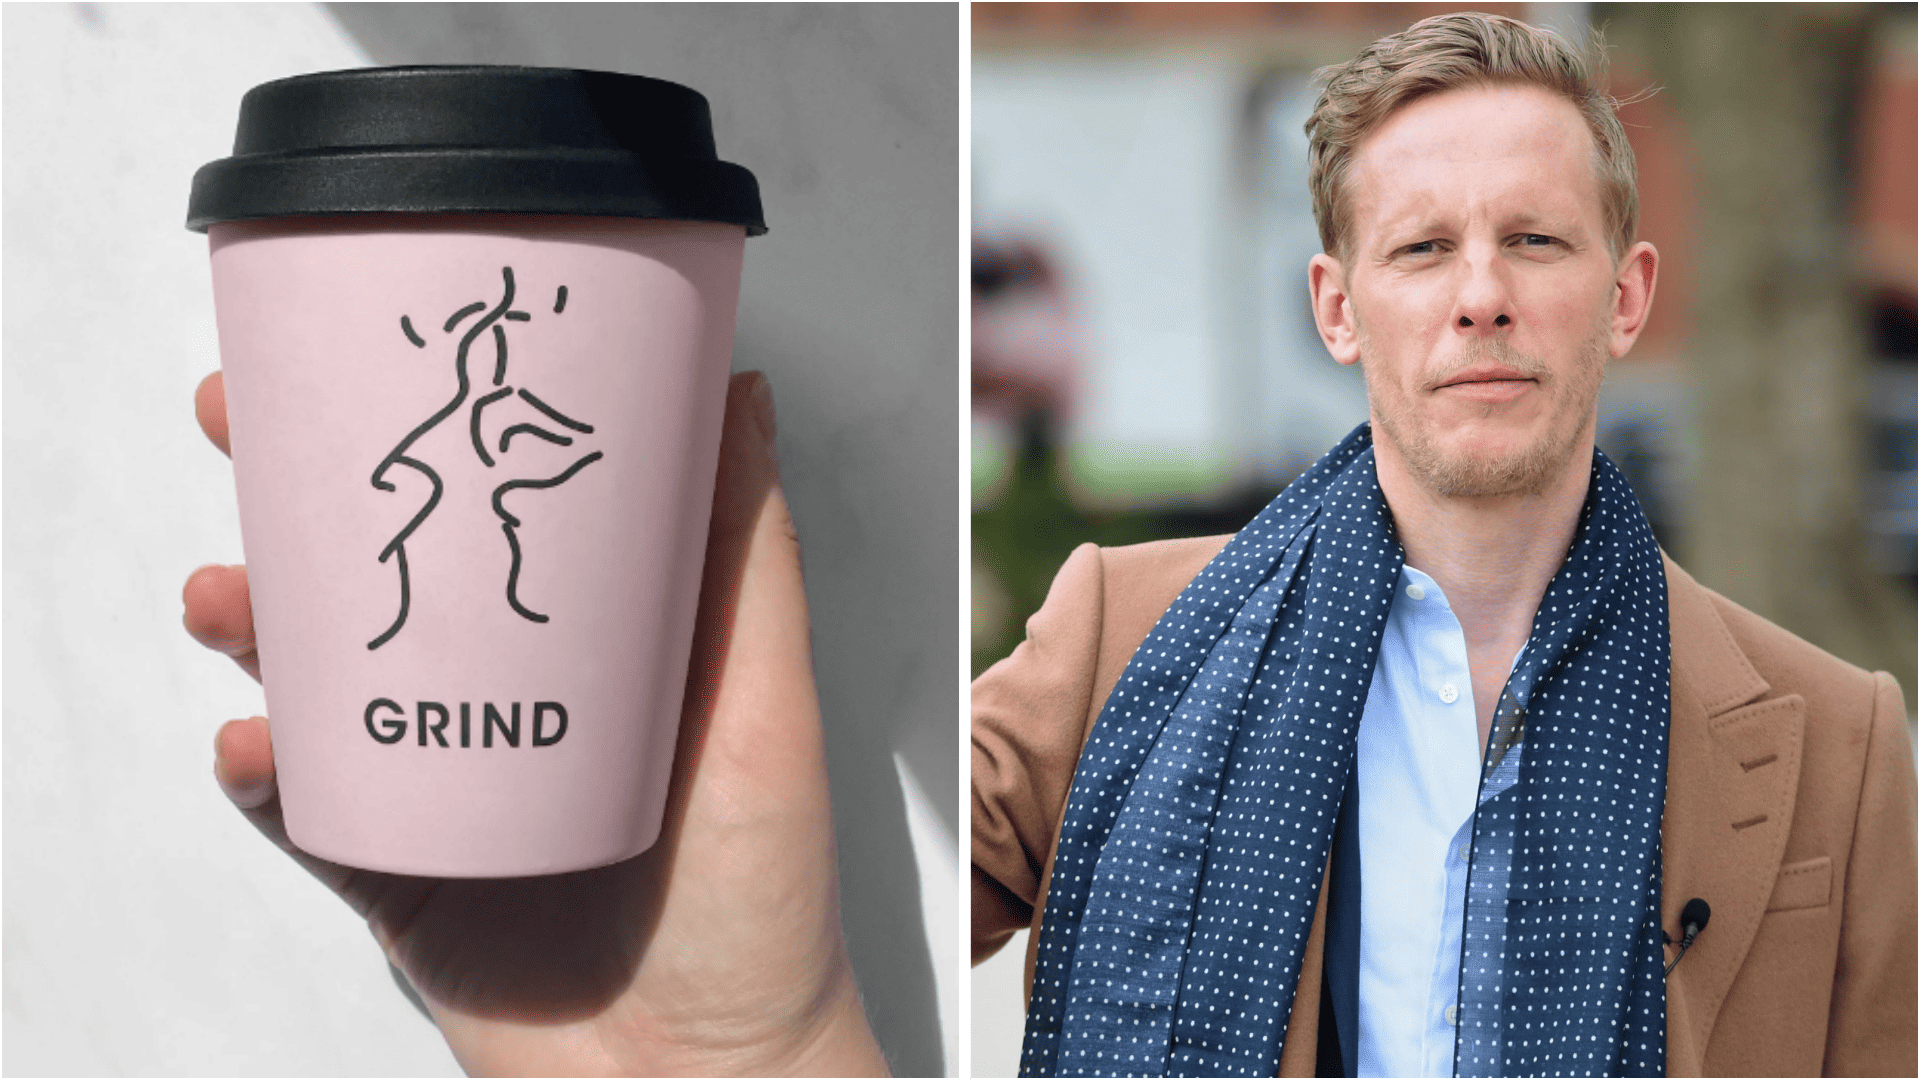 Ha! Coffee brand in feud with Laurence Fox donates to climate fund – in HIS name